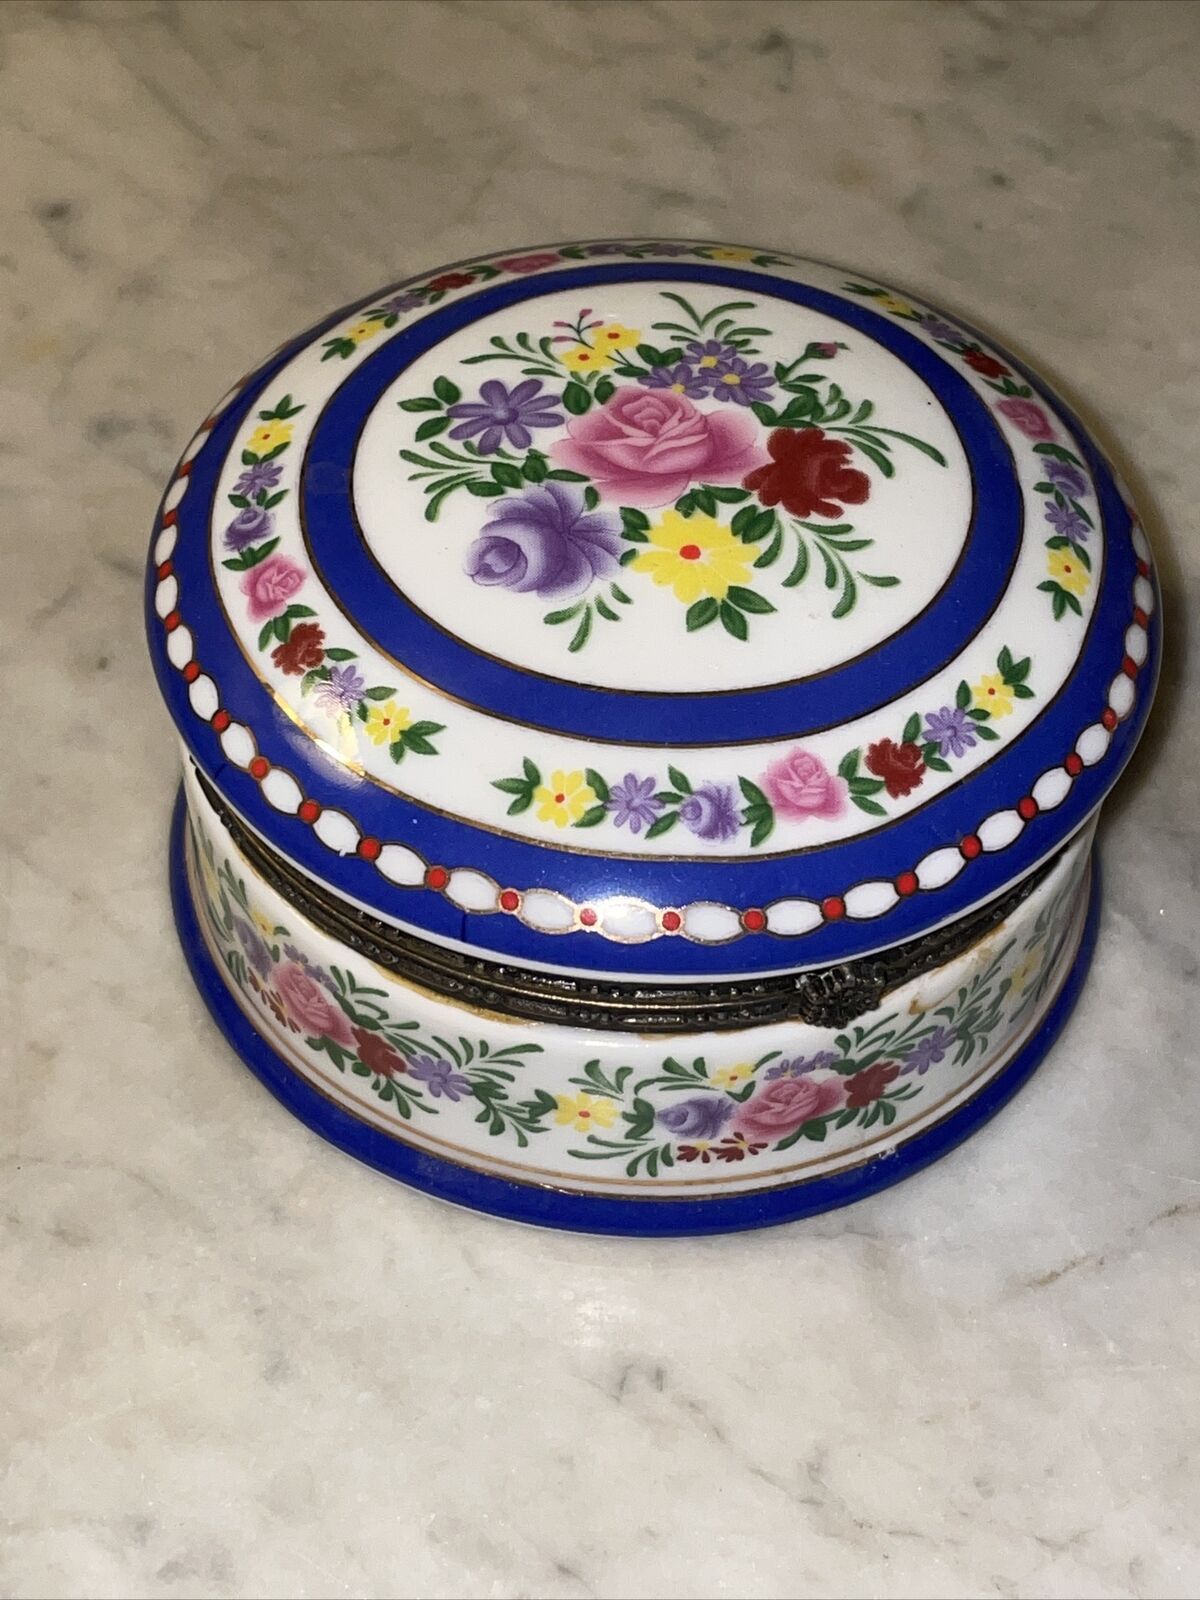 Imperial Porcelain Floral Cobalt Blue Band Trinket Jewelry Box Hinged Lid Clasp 